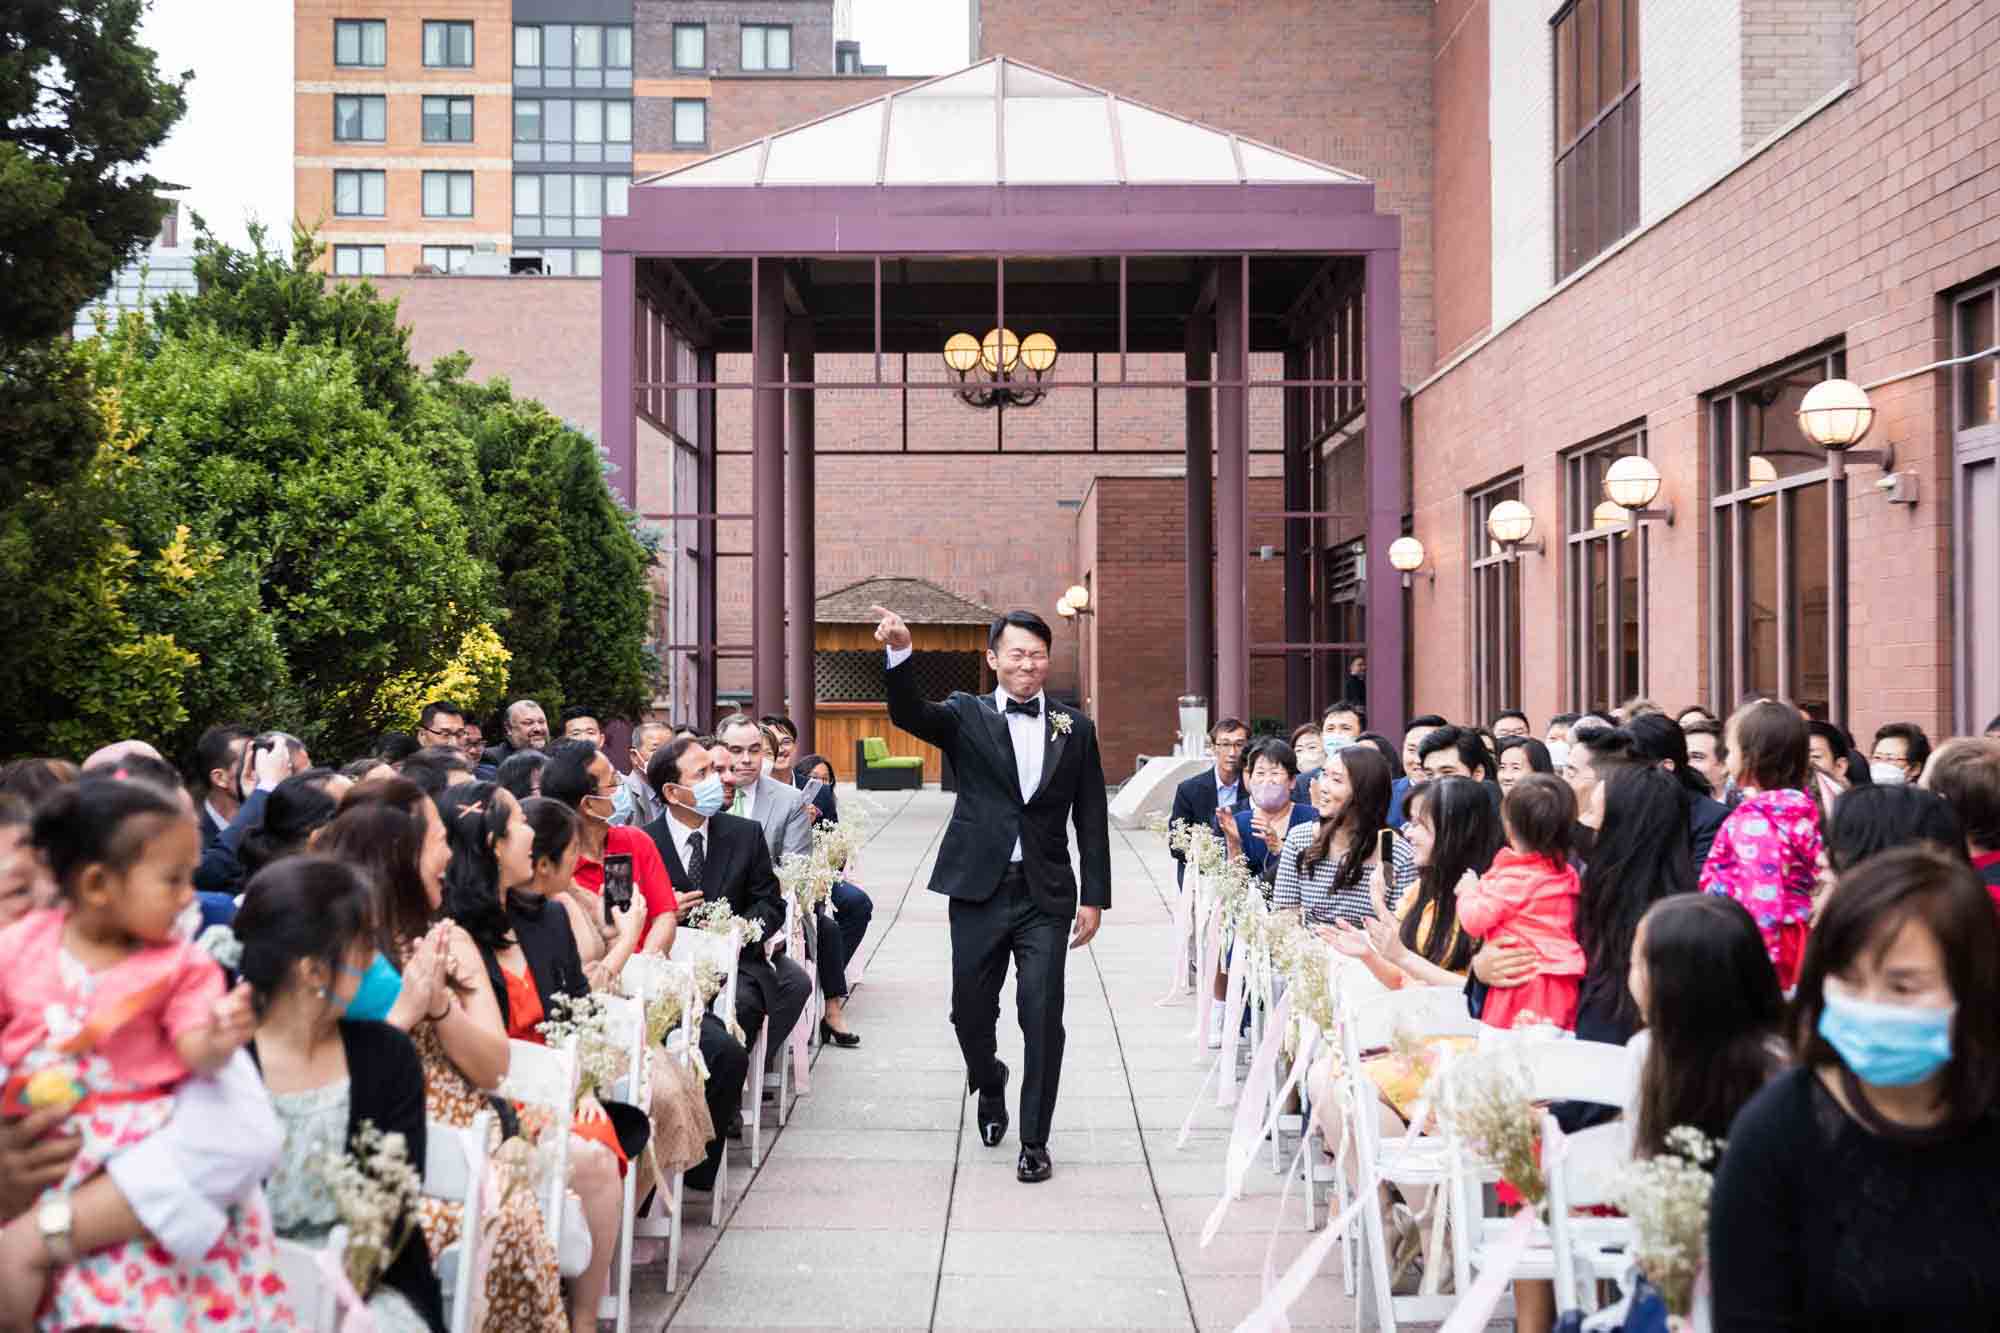 Groom walking down aisle raising hand in gesture to crowd during ceremony at a Sheraton LaGuardia East Hotel wedding